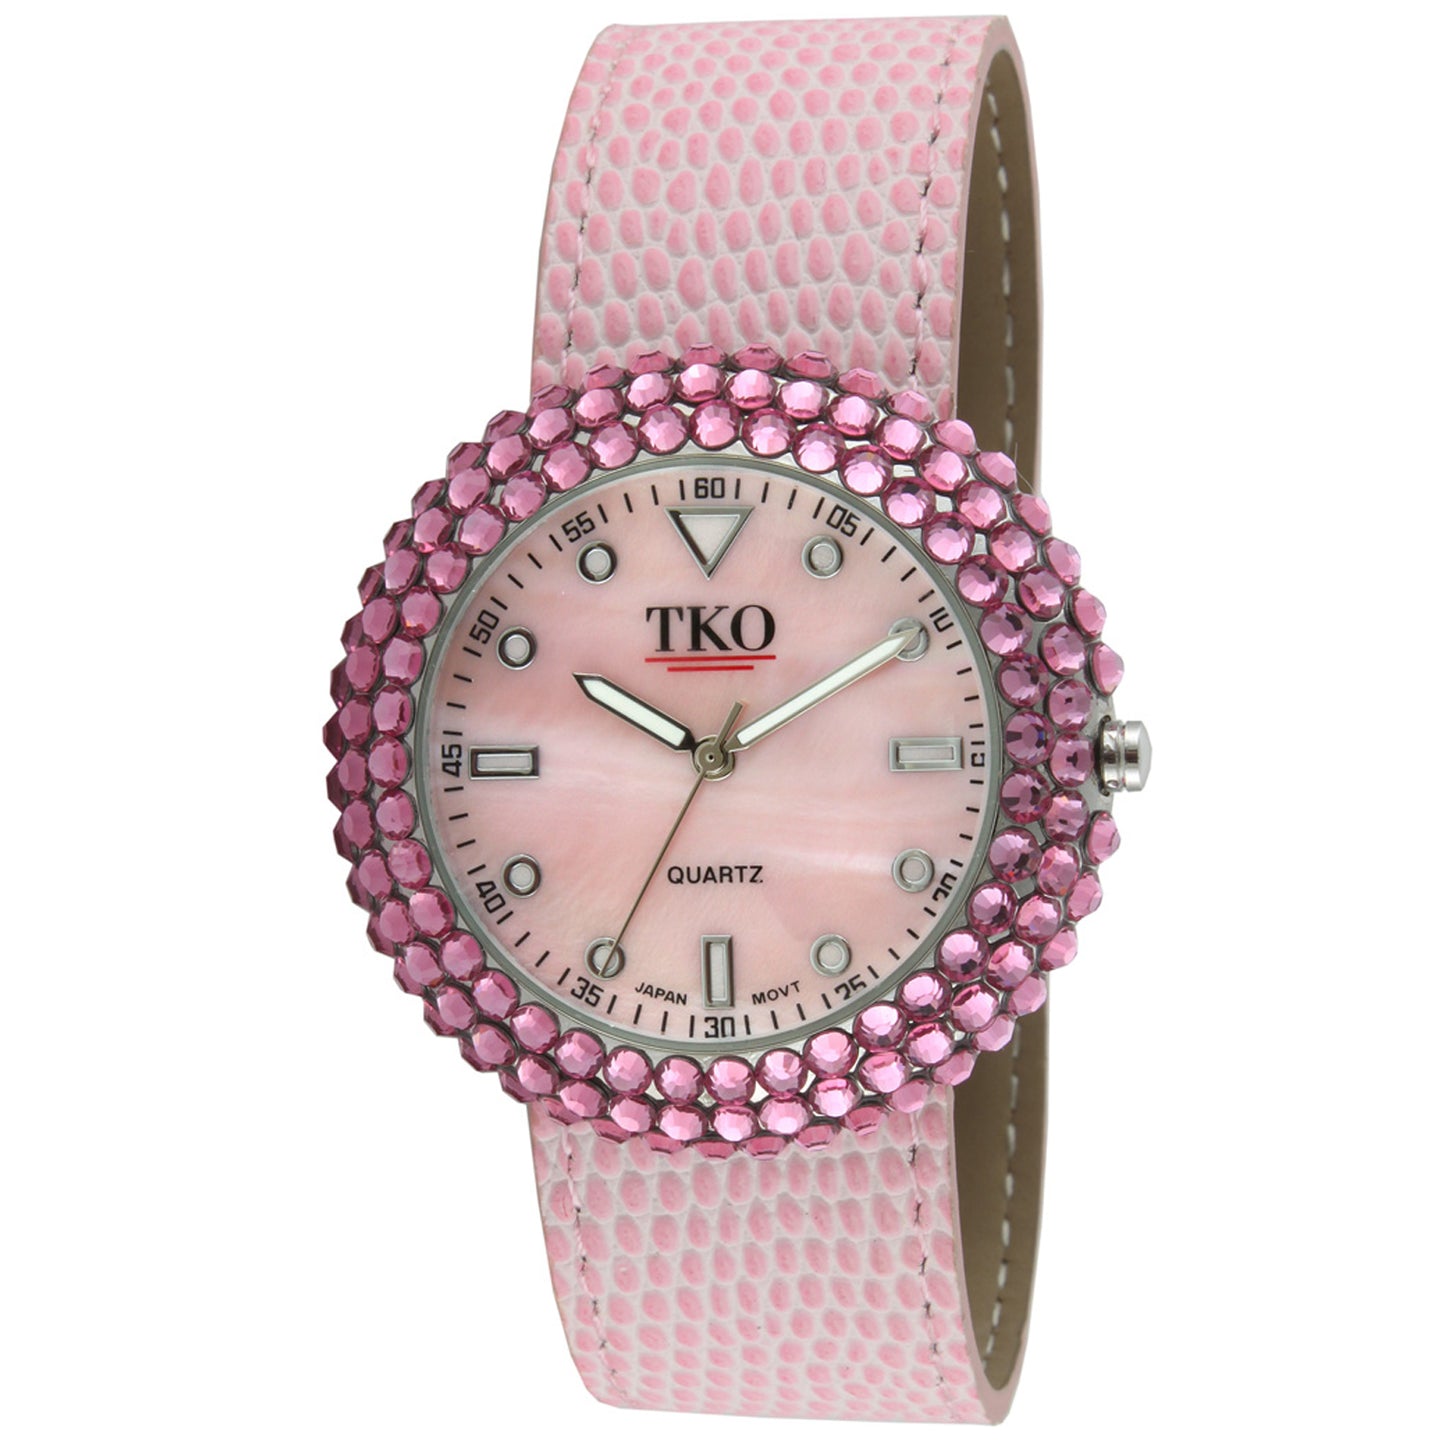 TKO Crystal Slapper with Leather Band - Pink